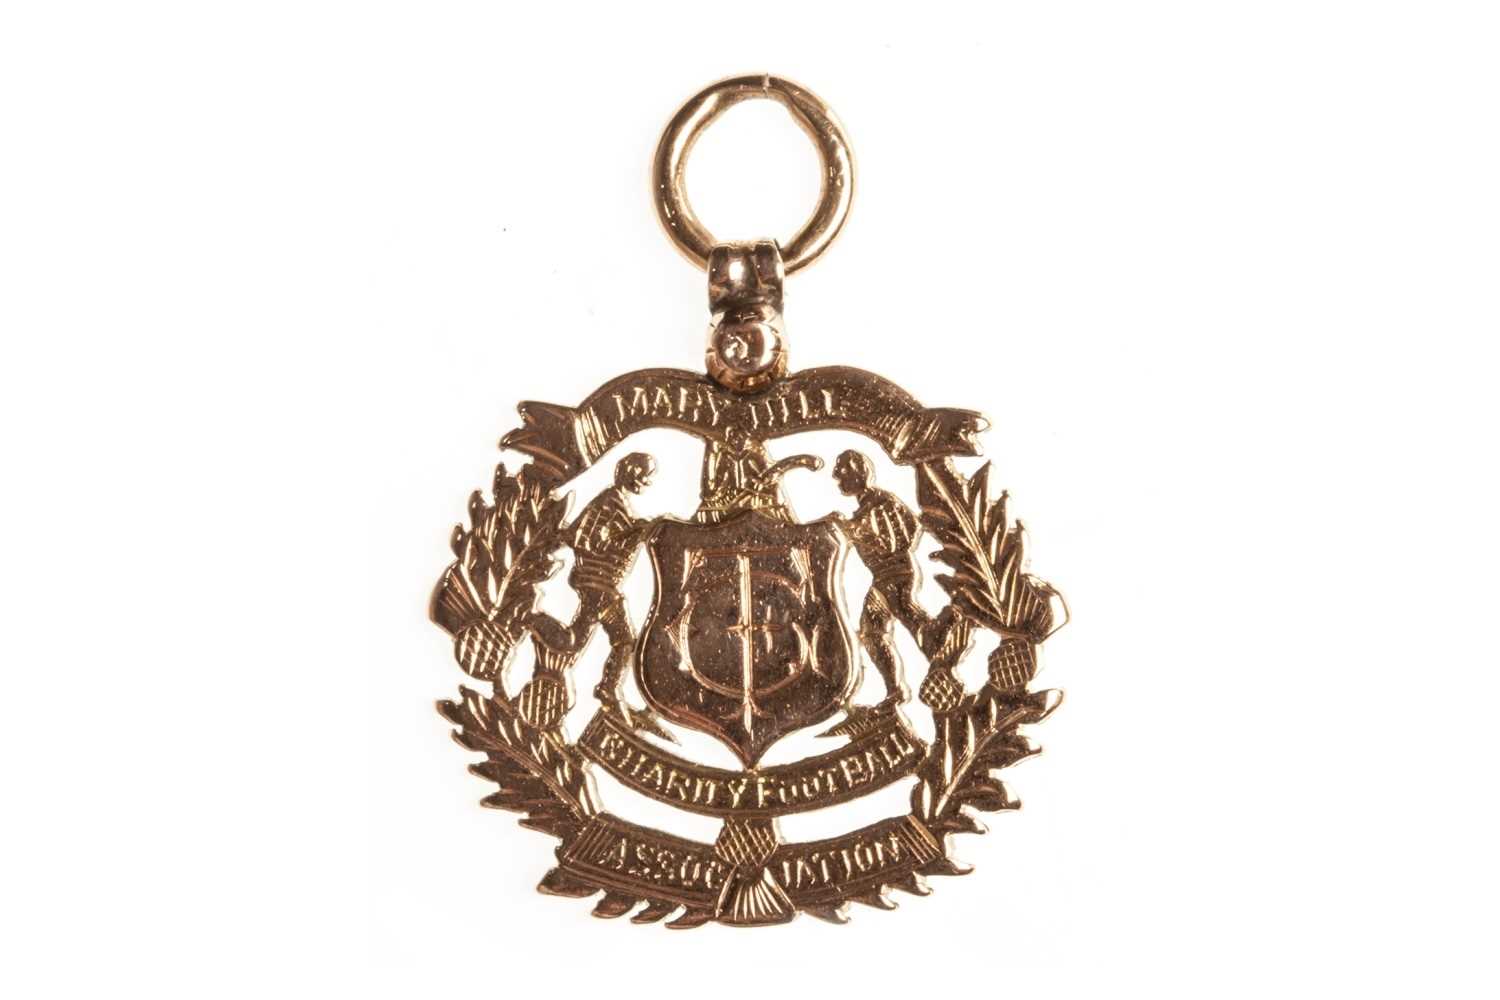 Lot 1823 - A LATE VICTORIAN MARYHILL CHARITY FOOTBALL ASSOCIATION MEDAL